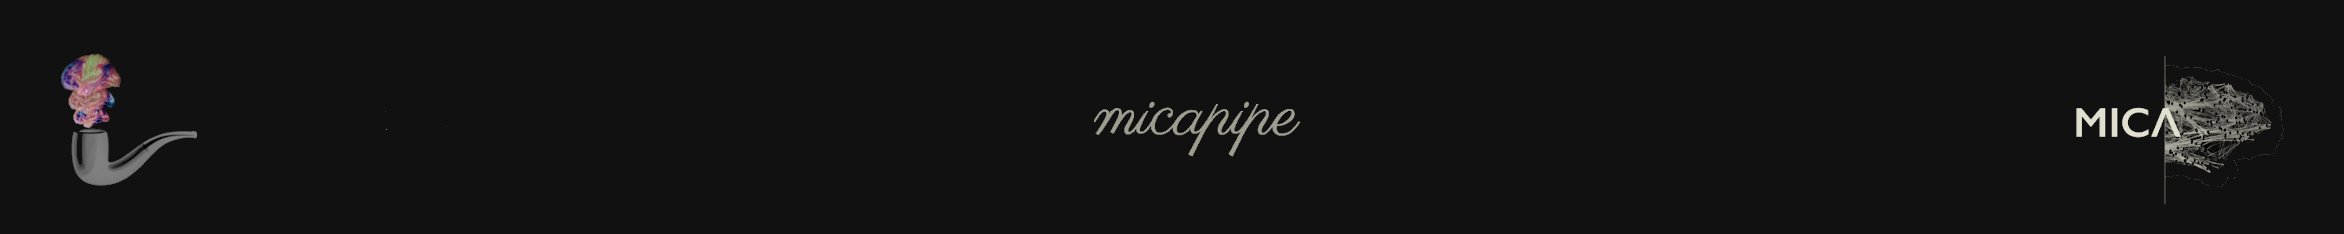 micapipe logo